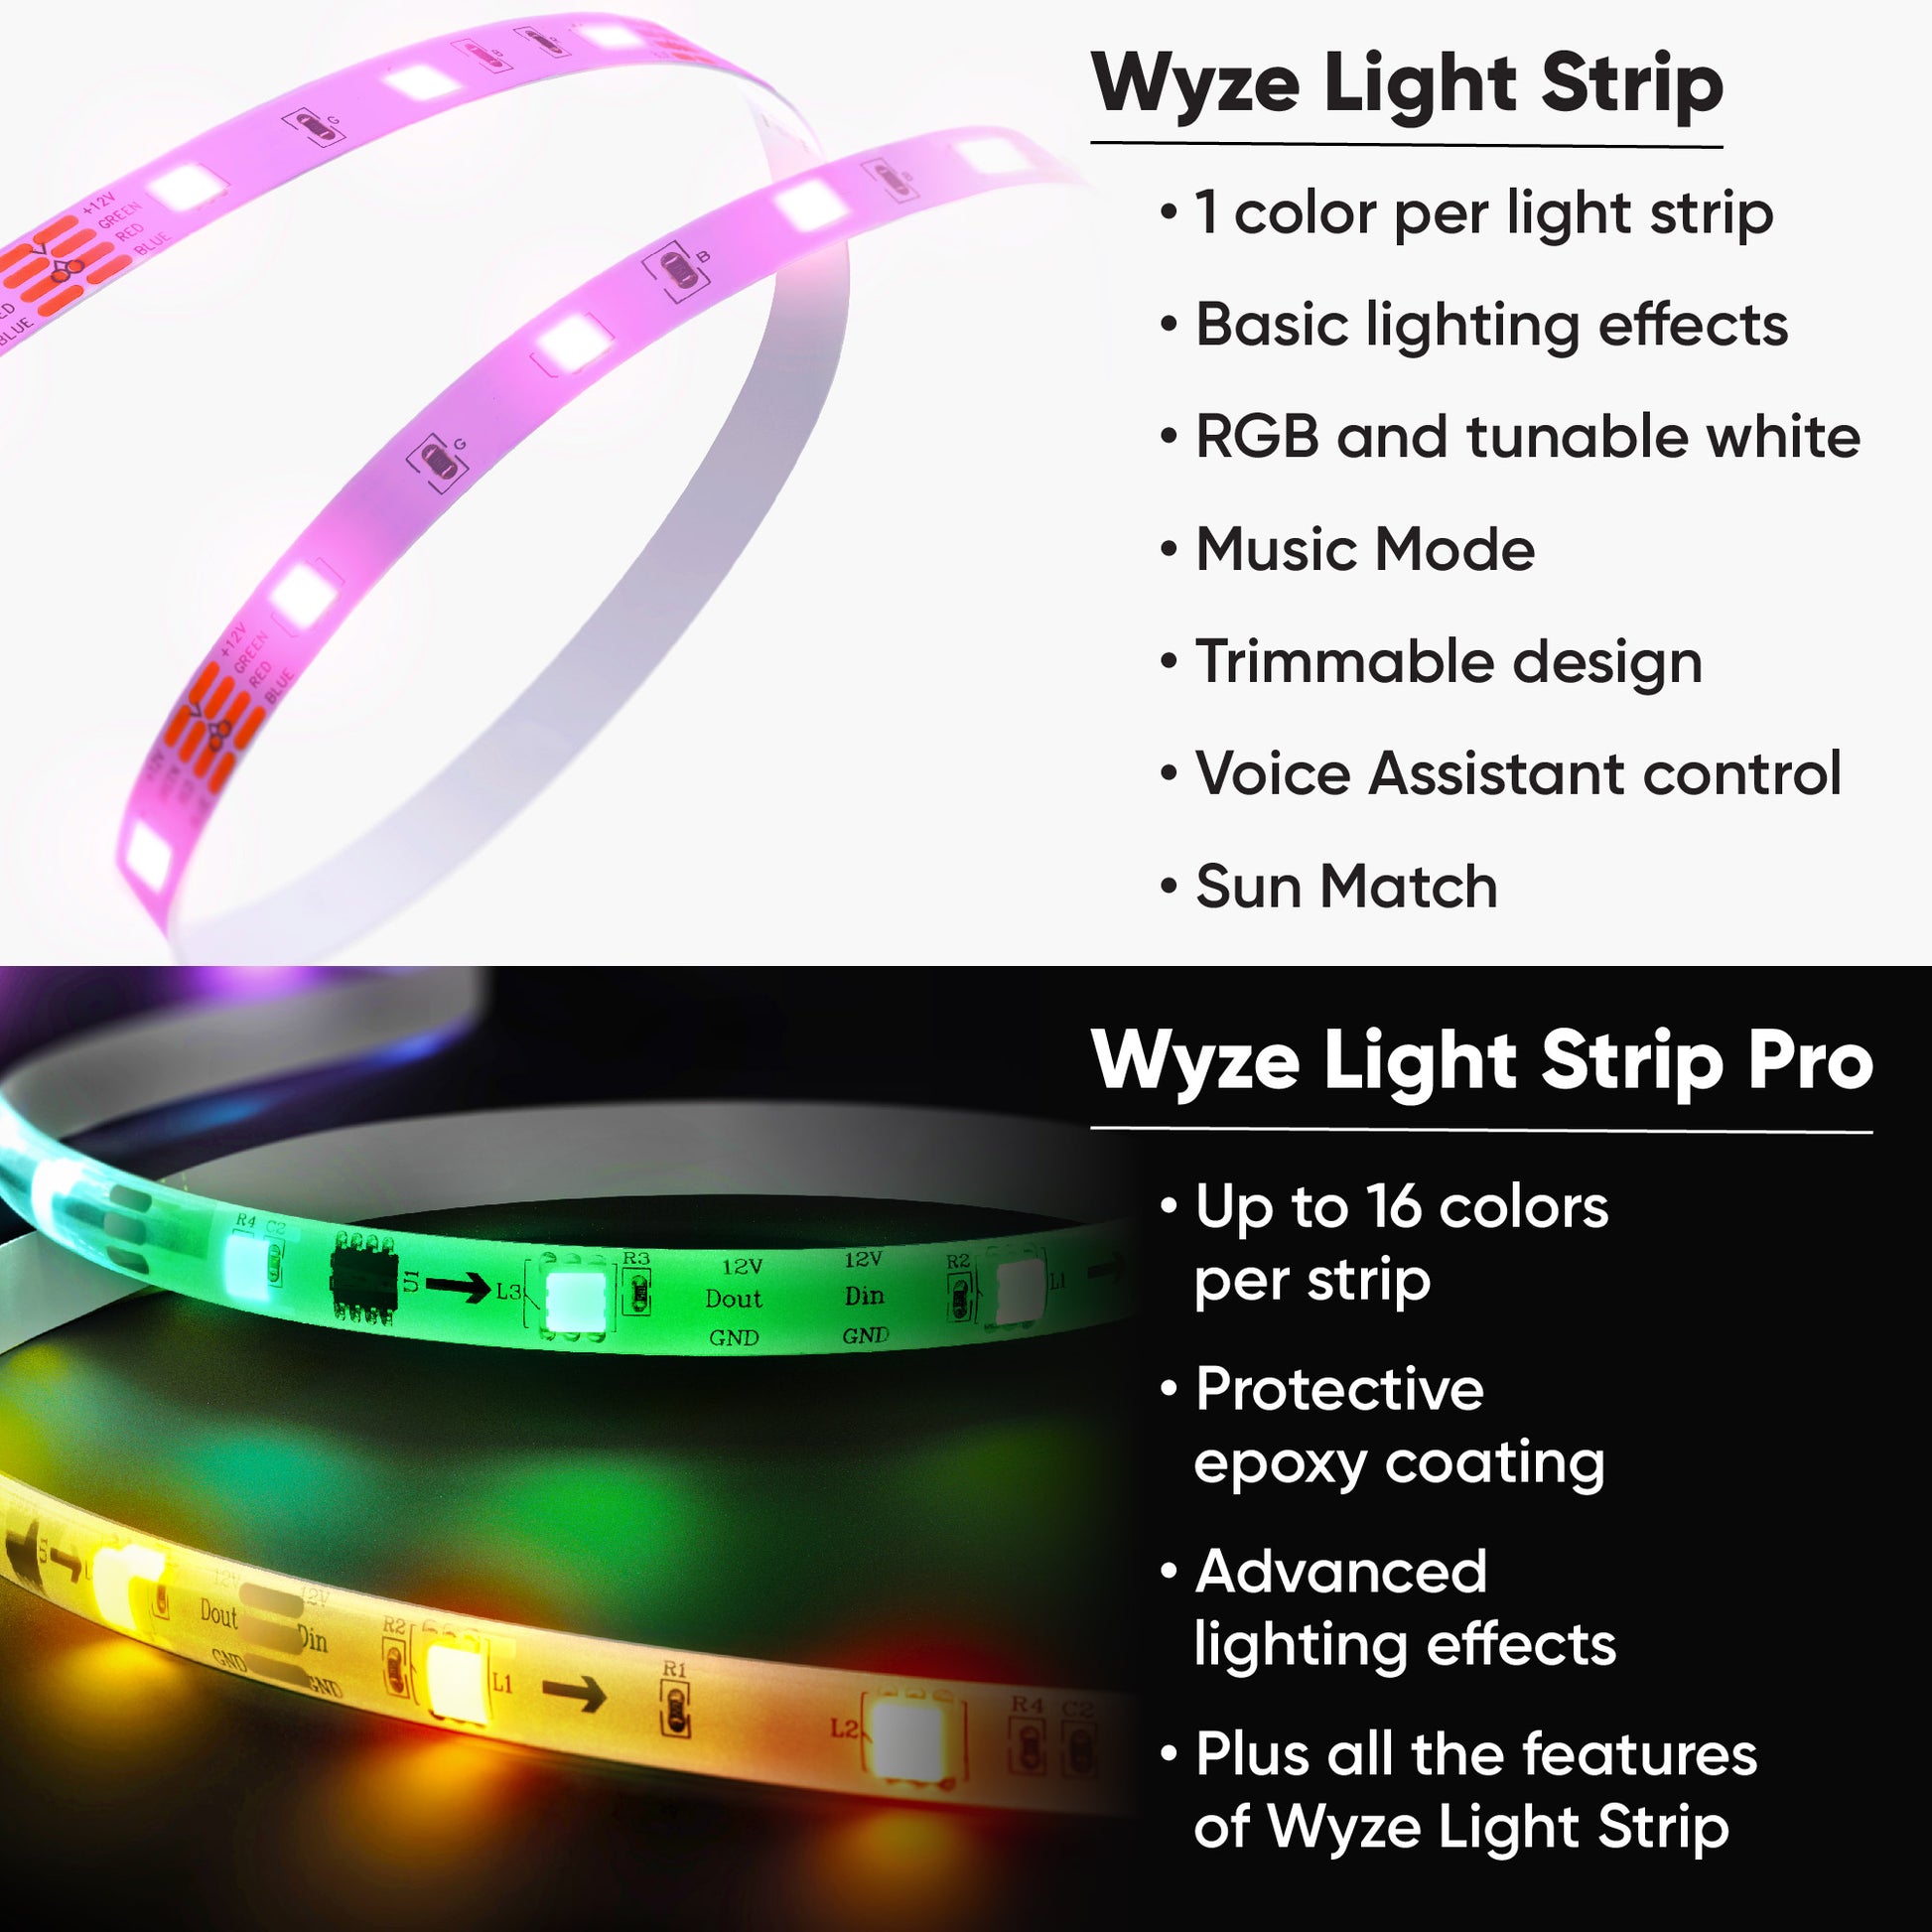 Wyze Light Strip, 32.8ft WiFi LED Strip Lights, 16 Million Colors RGB with App Control and Sync to Music for Home, Kitchen, TV